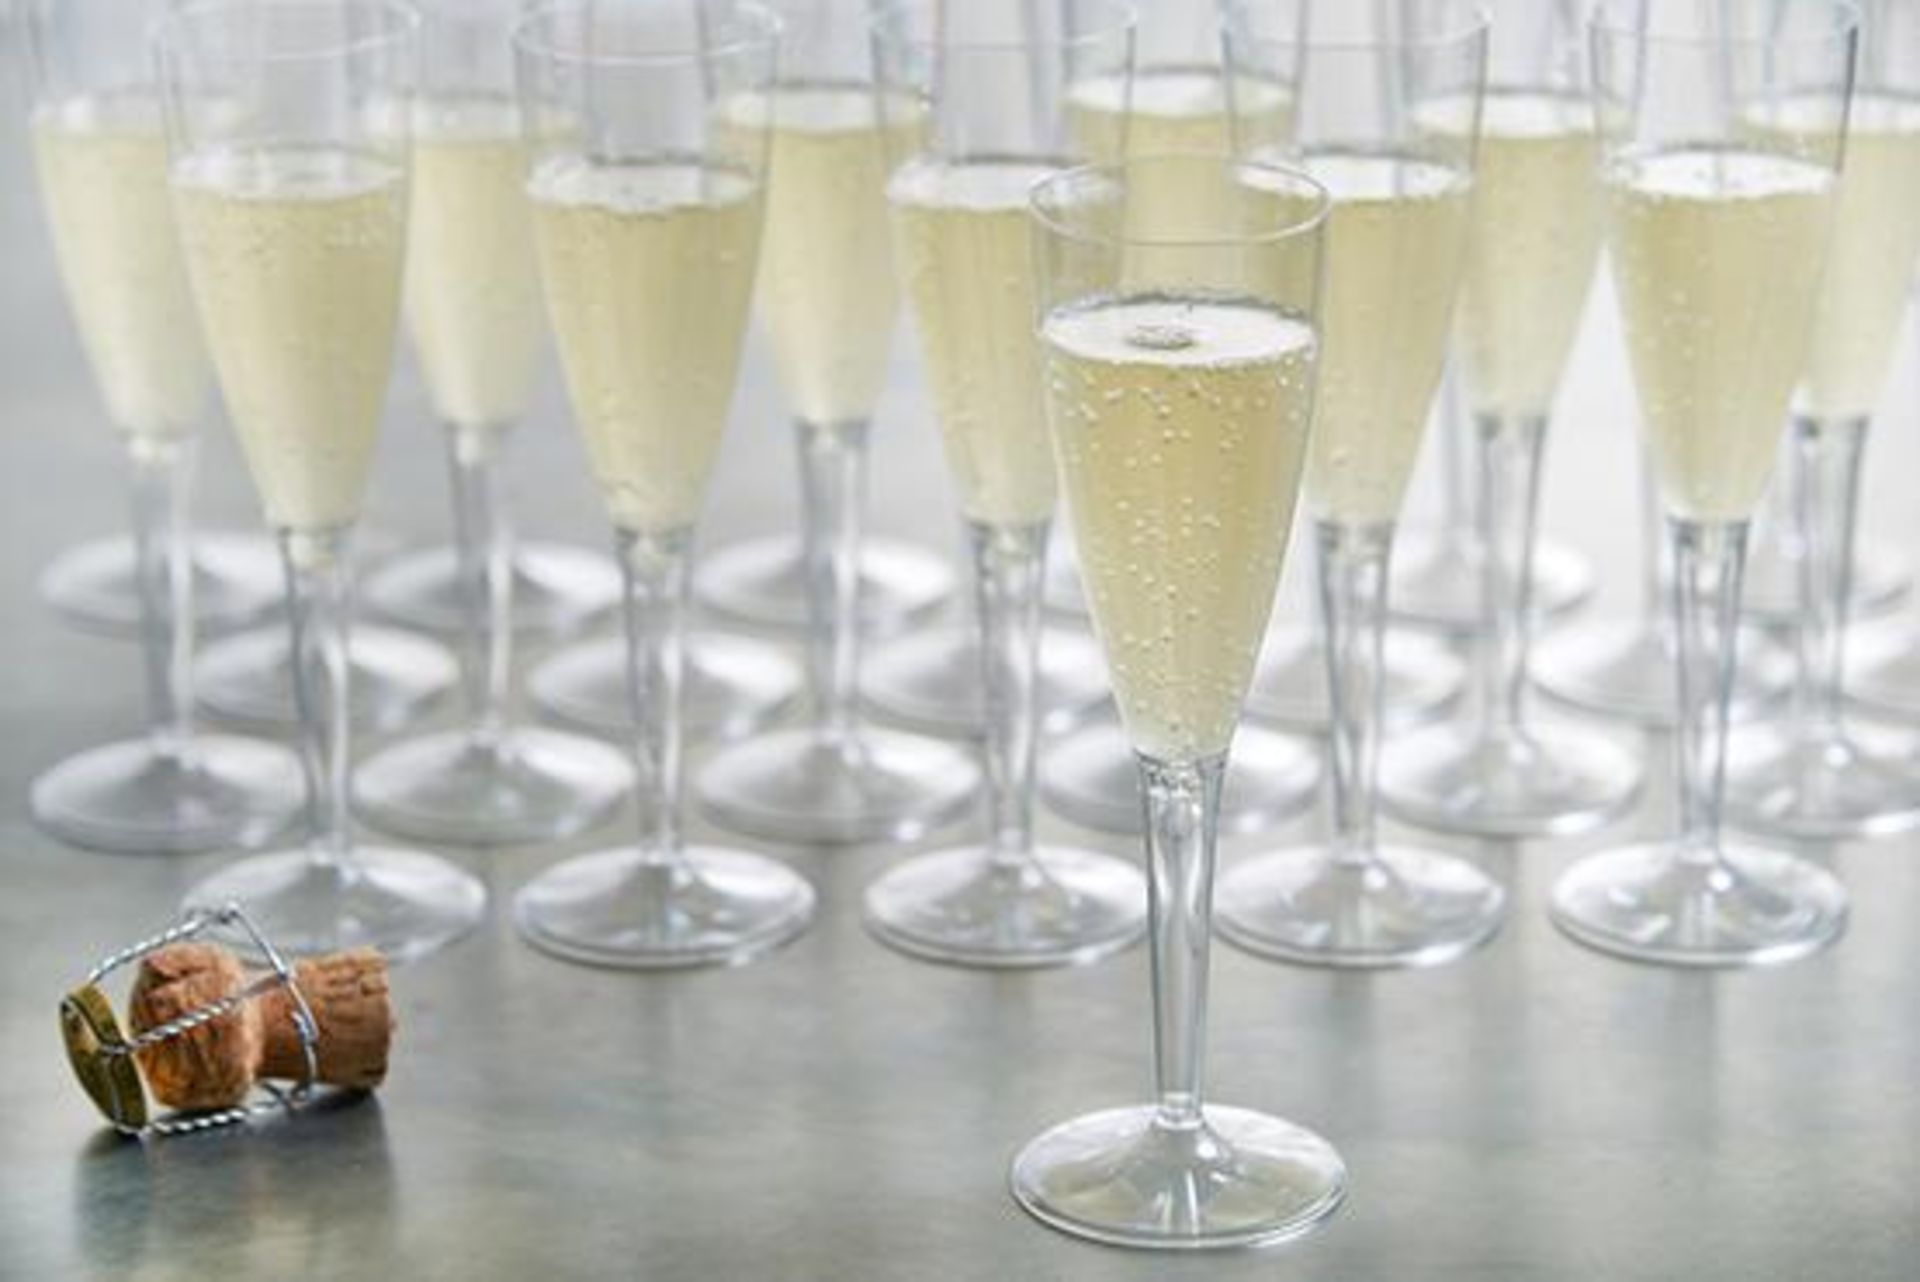 600 x Disposable Clear Plastic Champagne Flutes (170ml) - Brand: Remmerco CG111P - Brand New